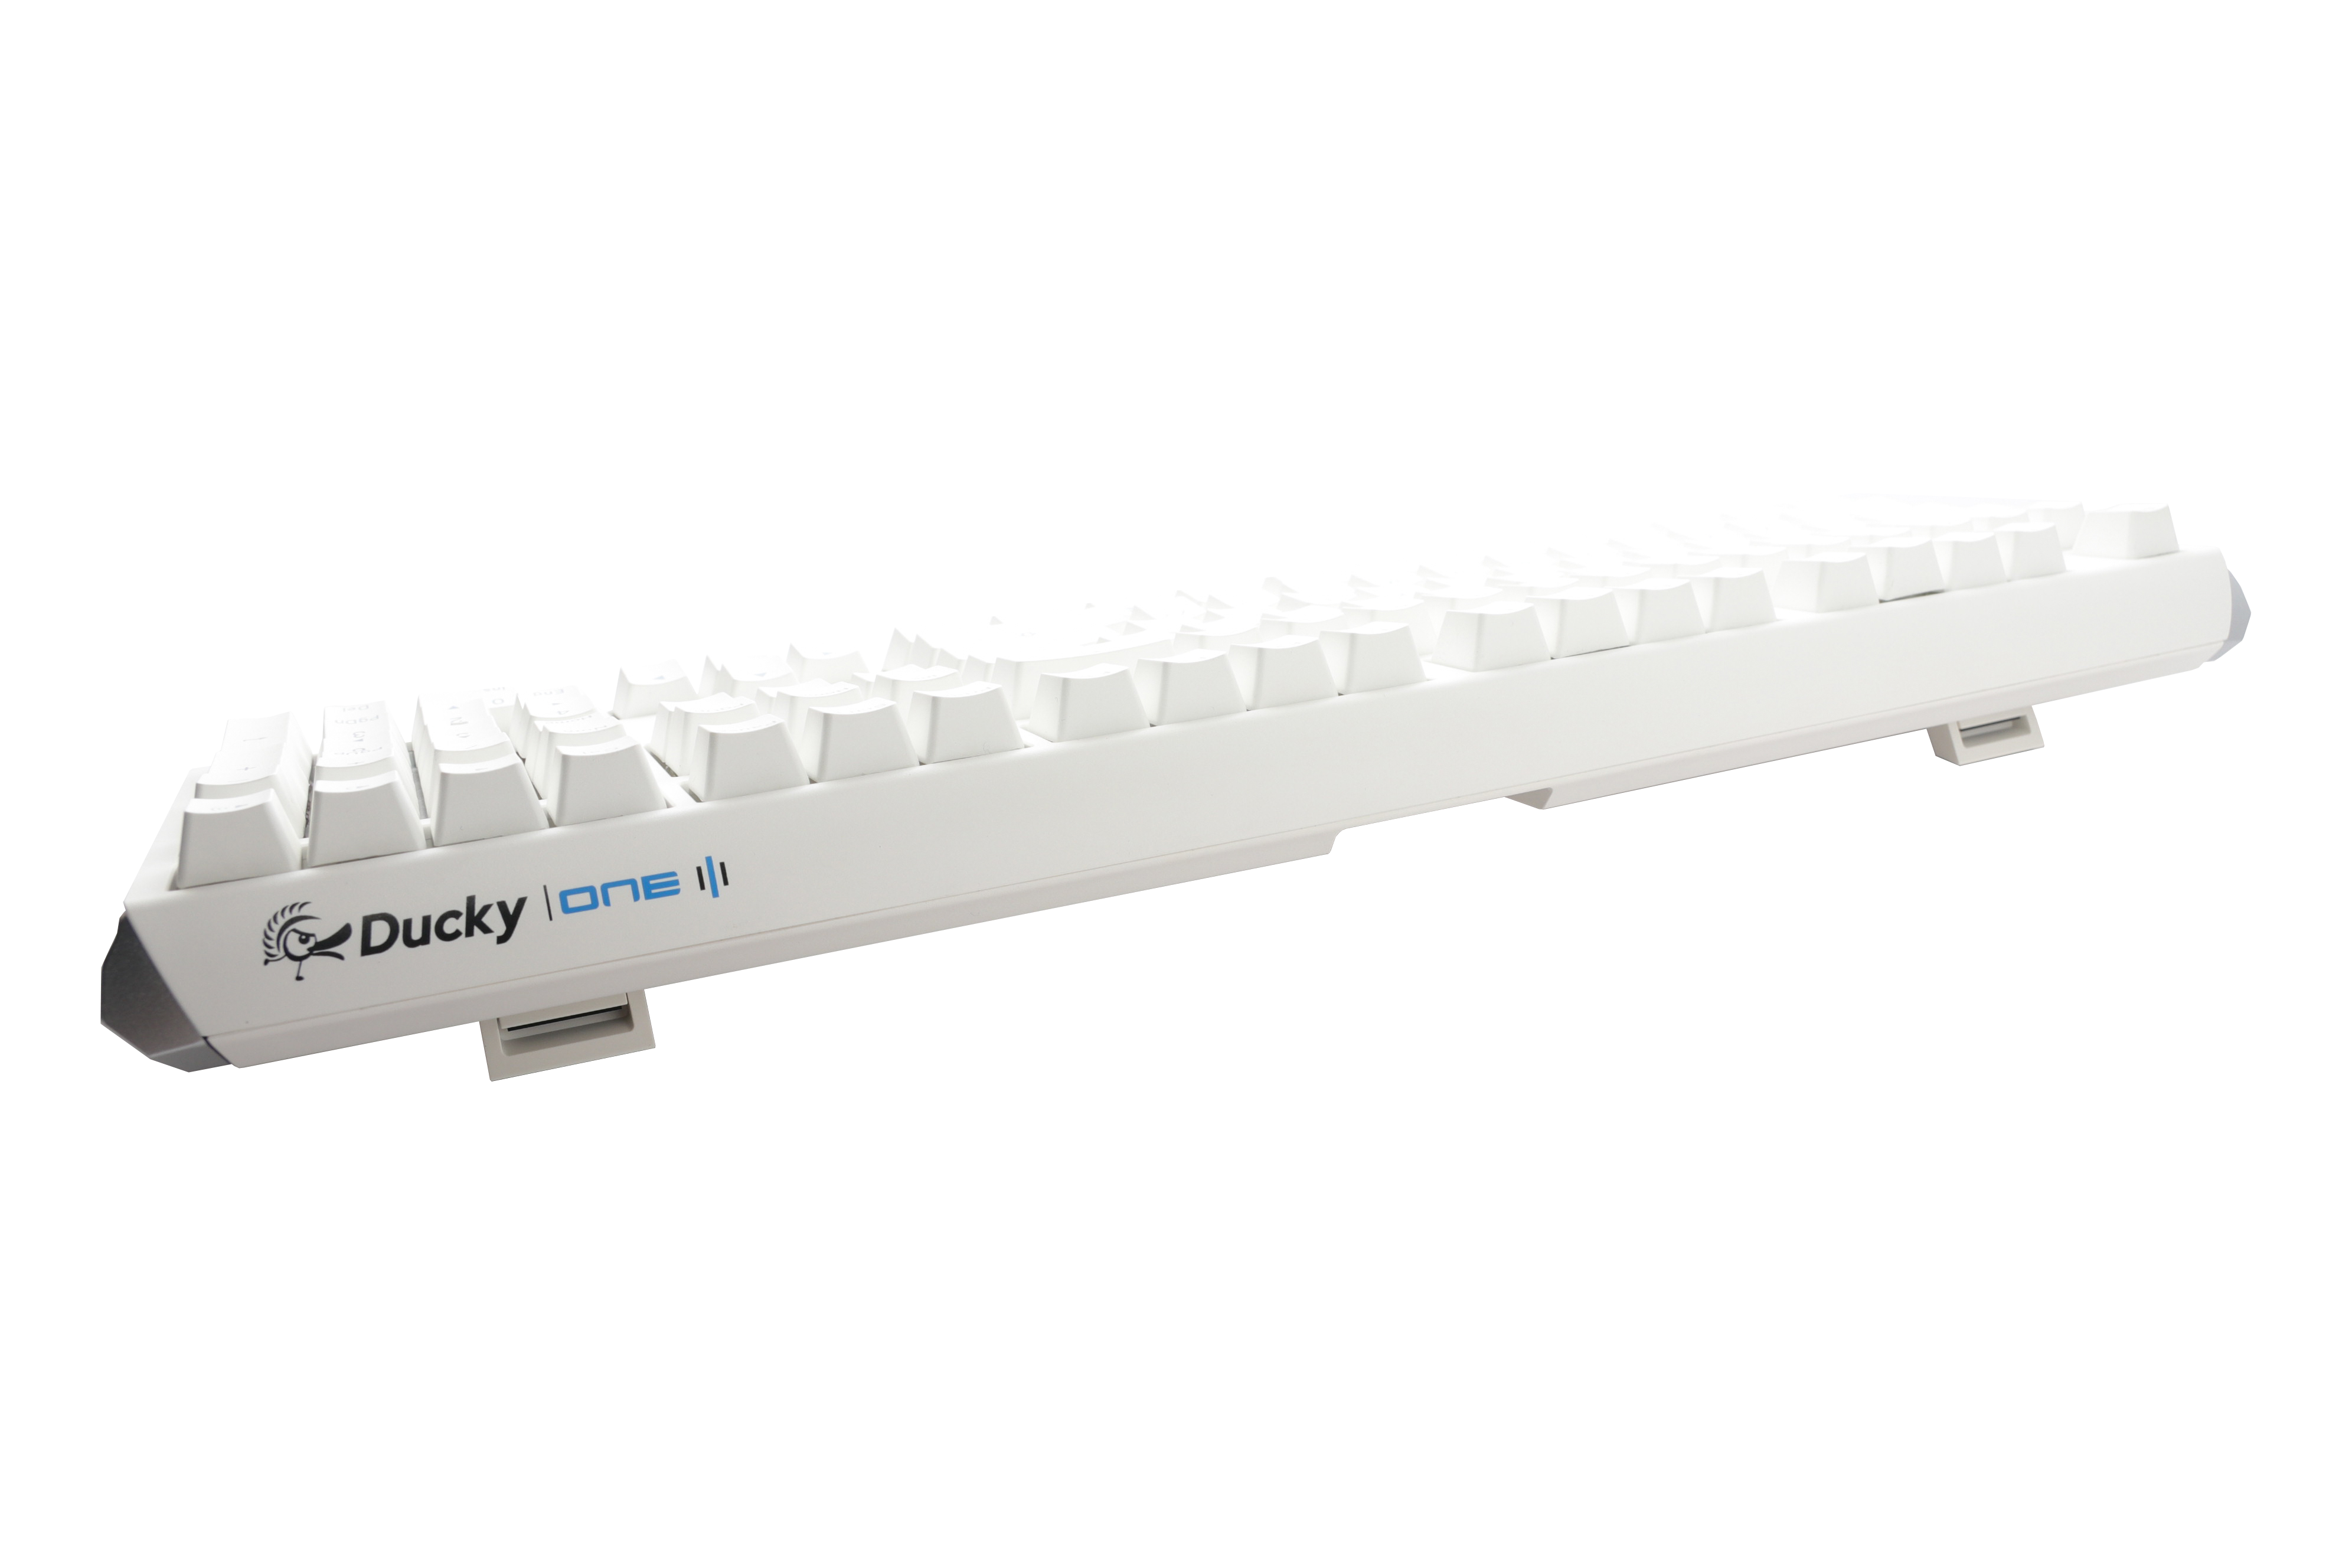 A Ducky One 3 - Classic Pure White Nordic - Fullsize - Cherry Silent Red mechanical keyboard with white PBT keycaps on a white background, viewed from a side angle, highlighting the elevated keys and brand logo.